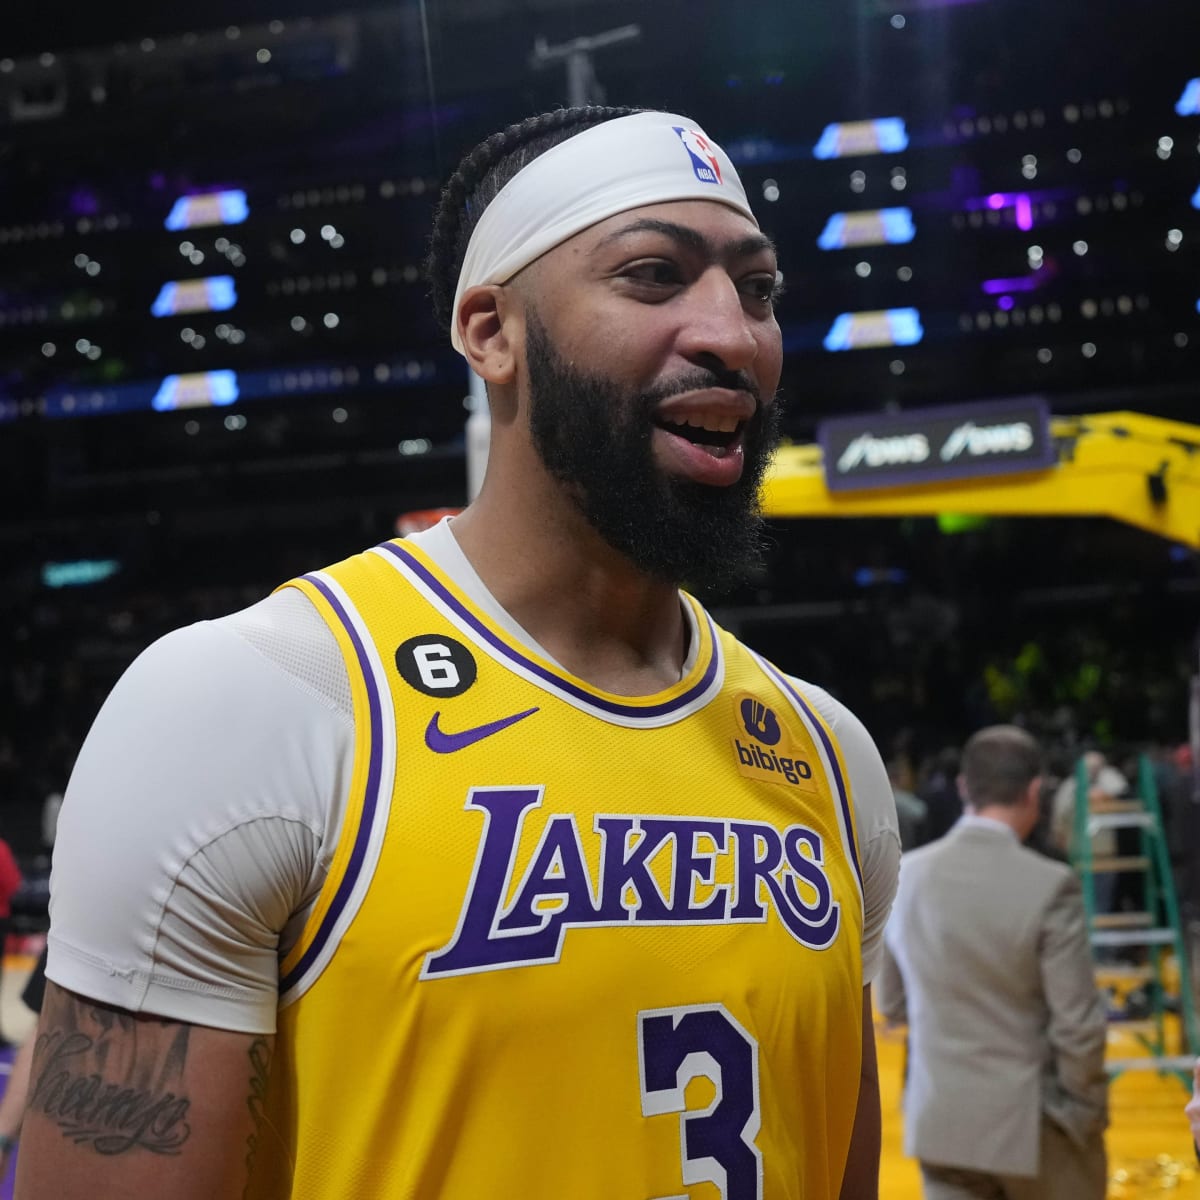 ad lakers jersey